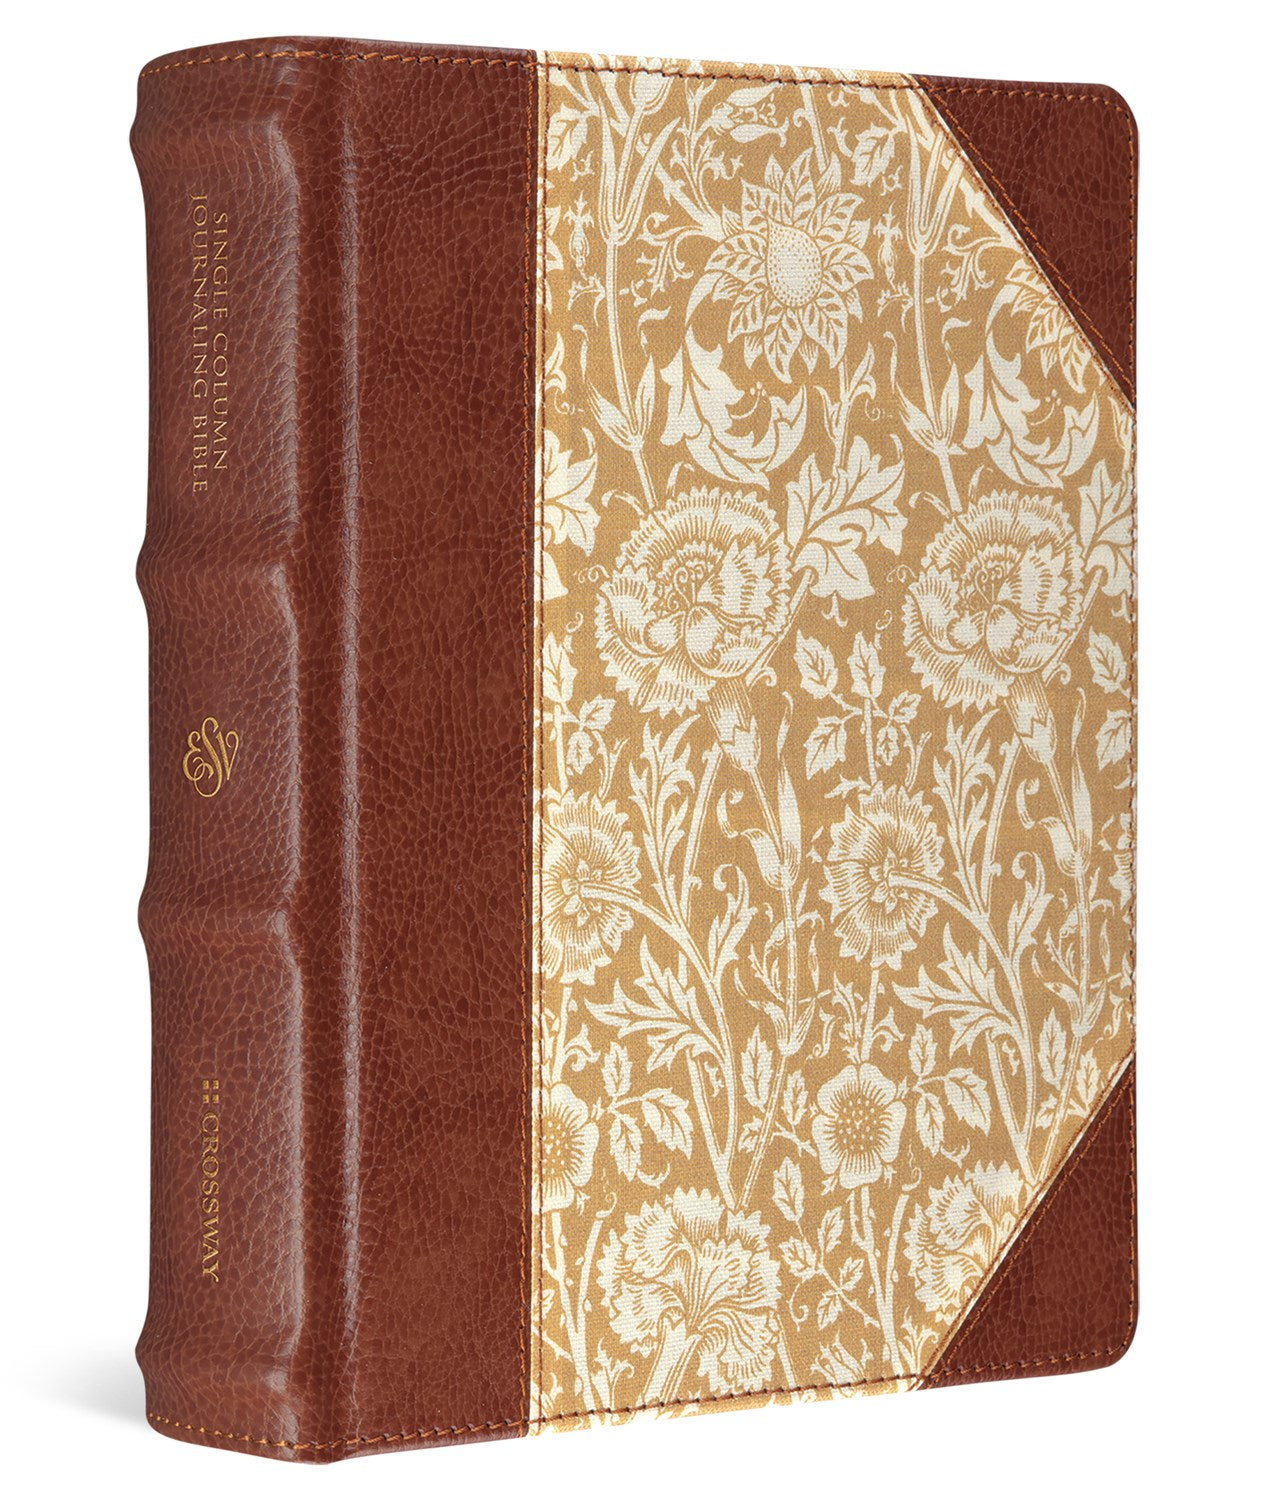 Seed of Abraham Christian Bookstore - (In)Courage - ESV Single Column Journaling Bible/Large Print-Antique Floral Design Cloth-Over-Board